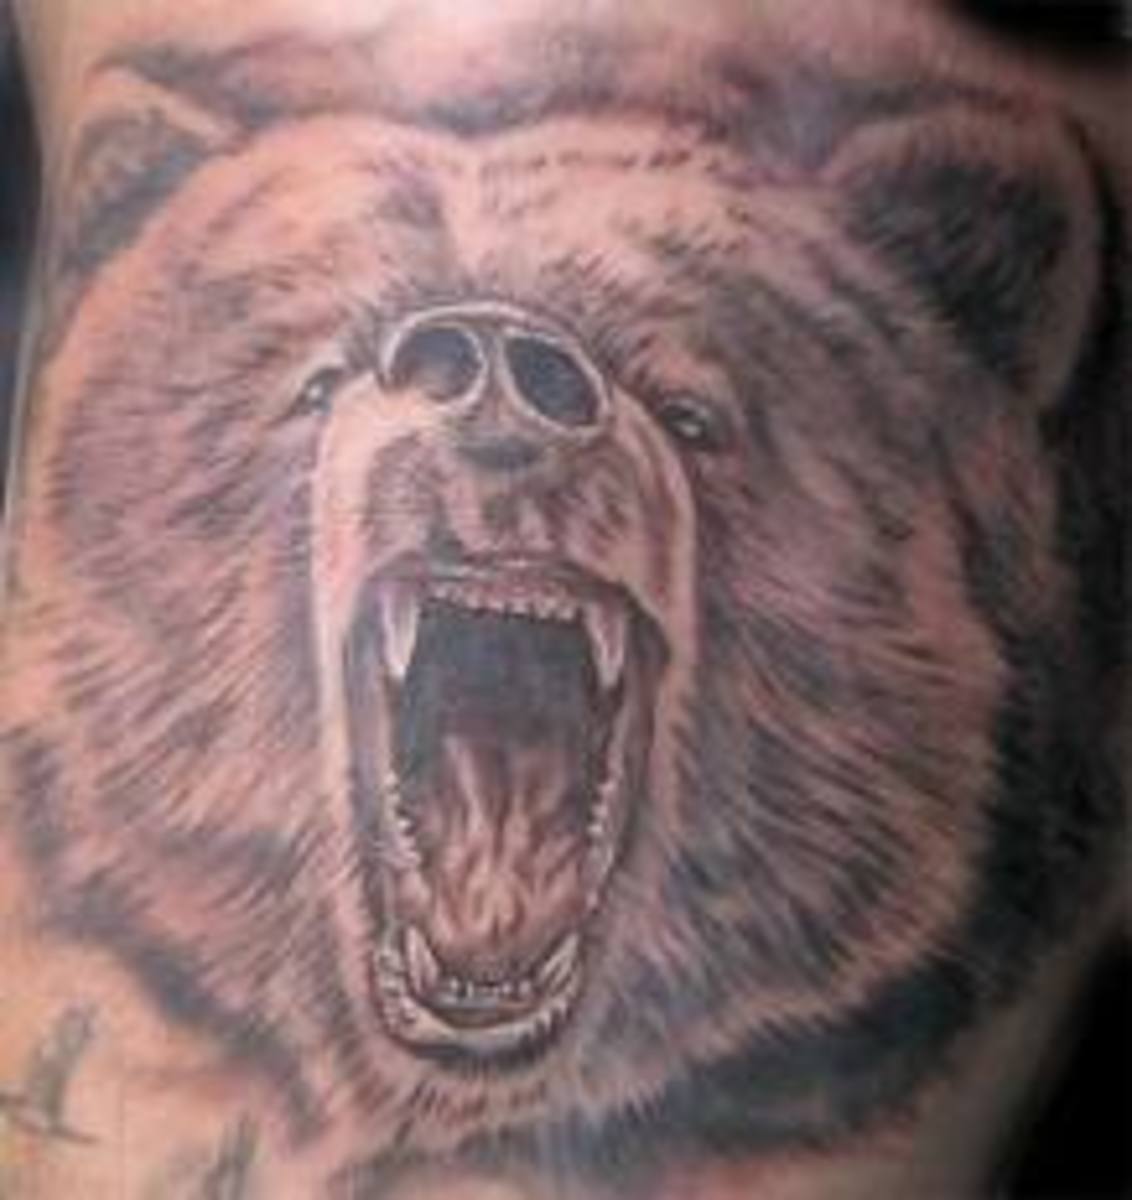 Bear Tattoos And Bear Tattoo Designs-Bear Tattoo Meanings And Ideas-Tattoo Pictures